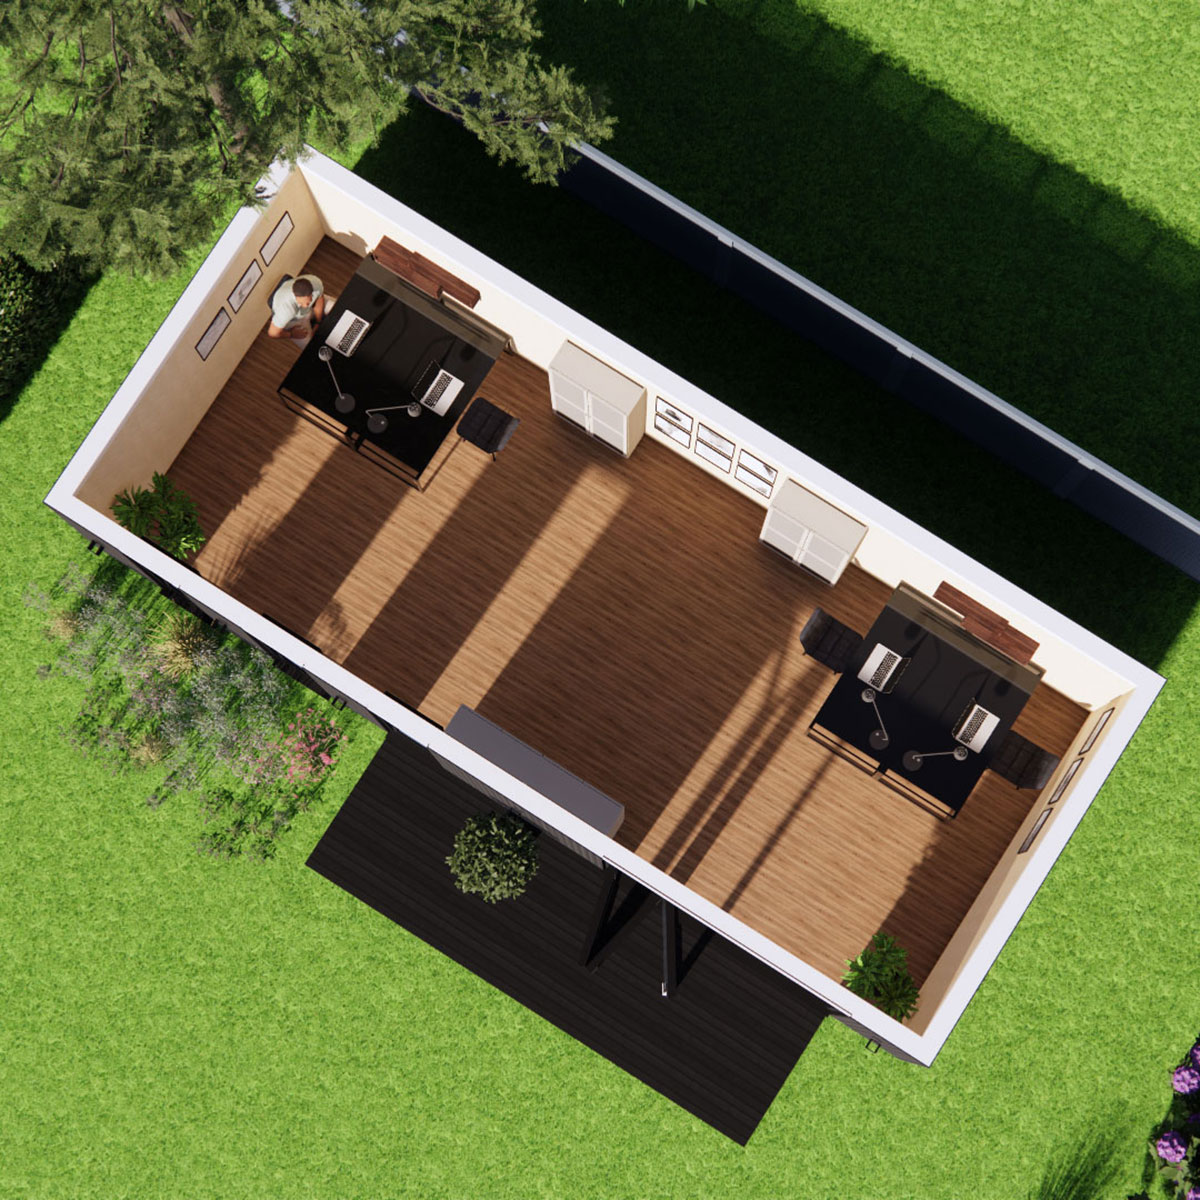 Interior layout of 3.6 by 8.6 garden room